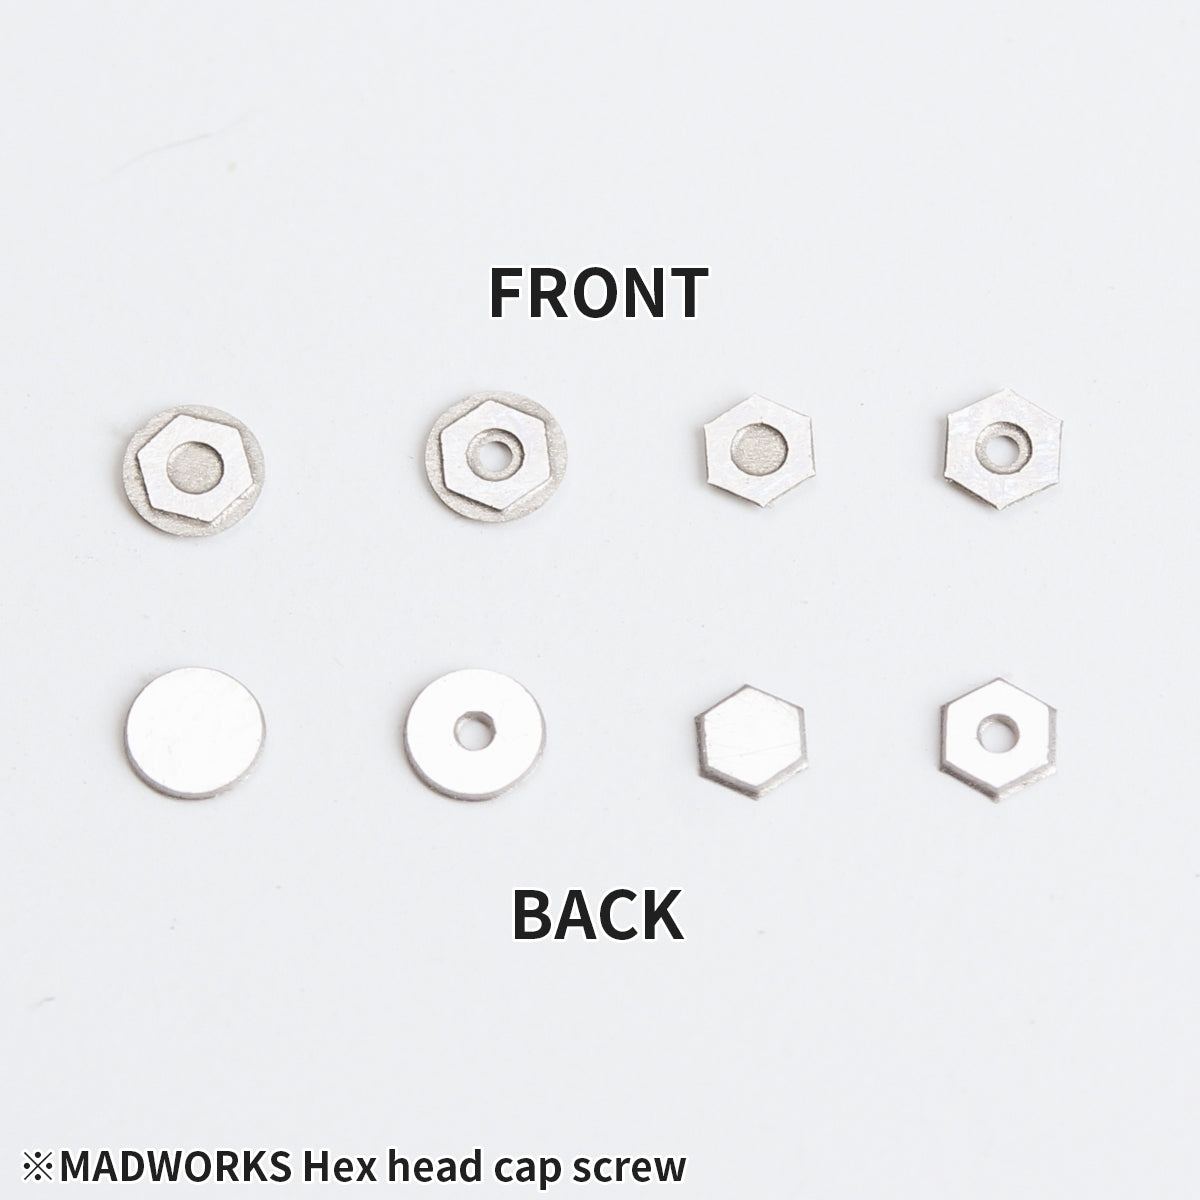 MADWORKS MT17 NUTS AND BOLTS PHOTO-ETCHED 1.0-1.3MM